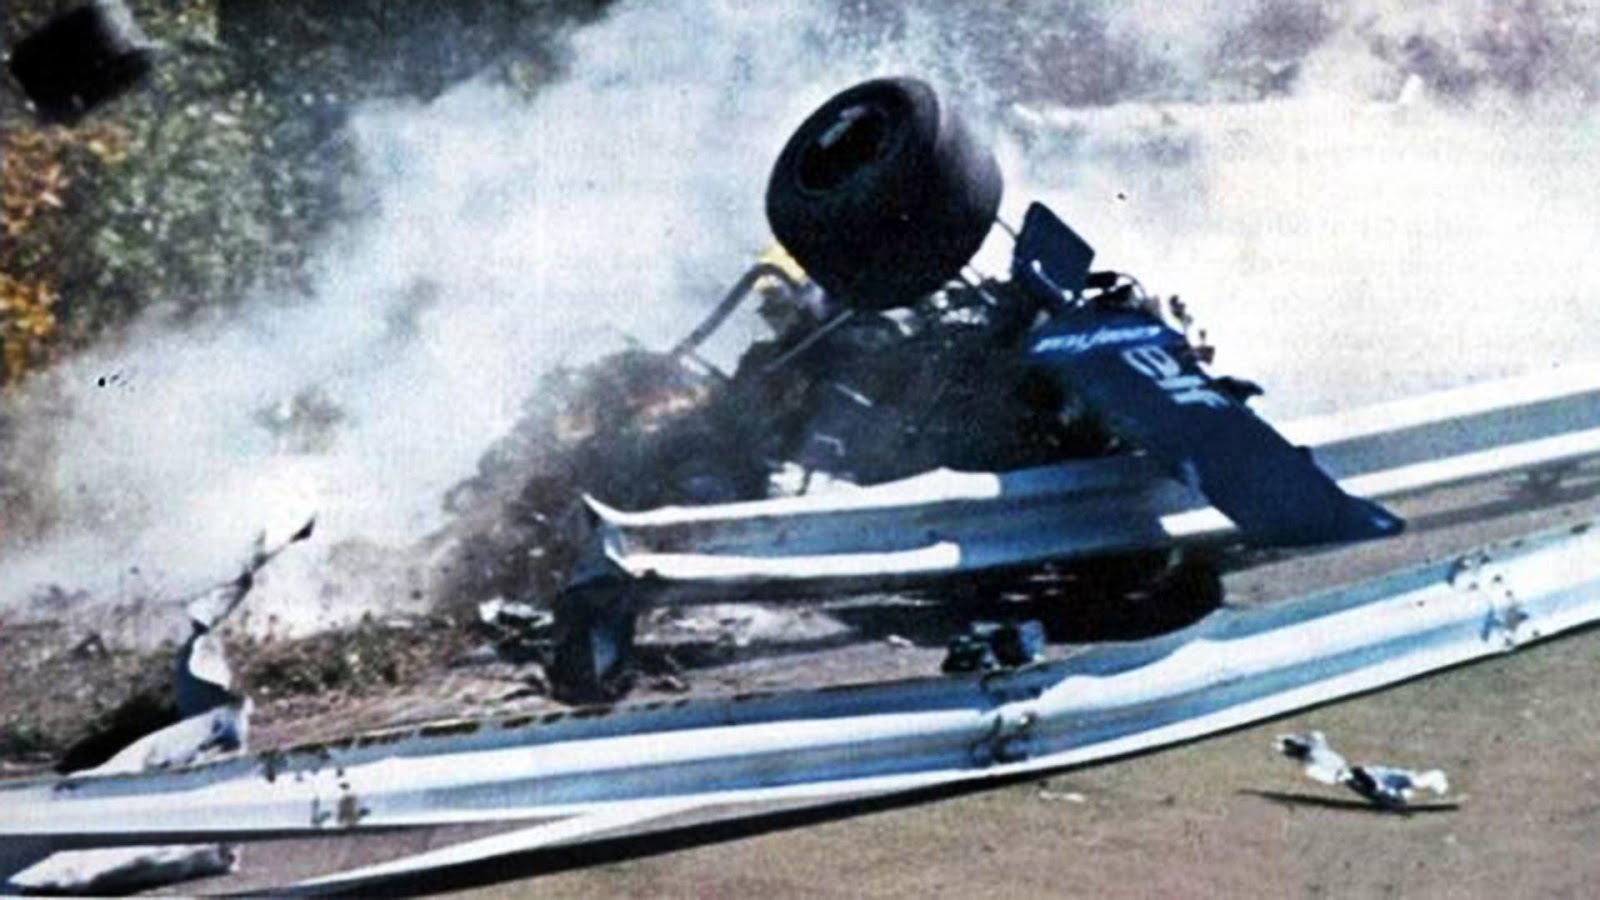 The accident of Francois Cevert.